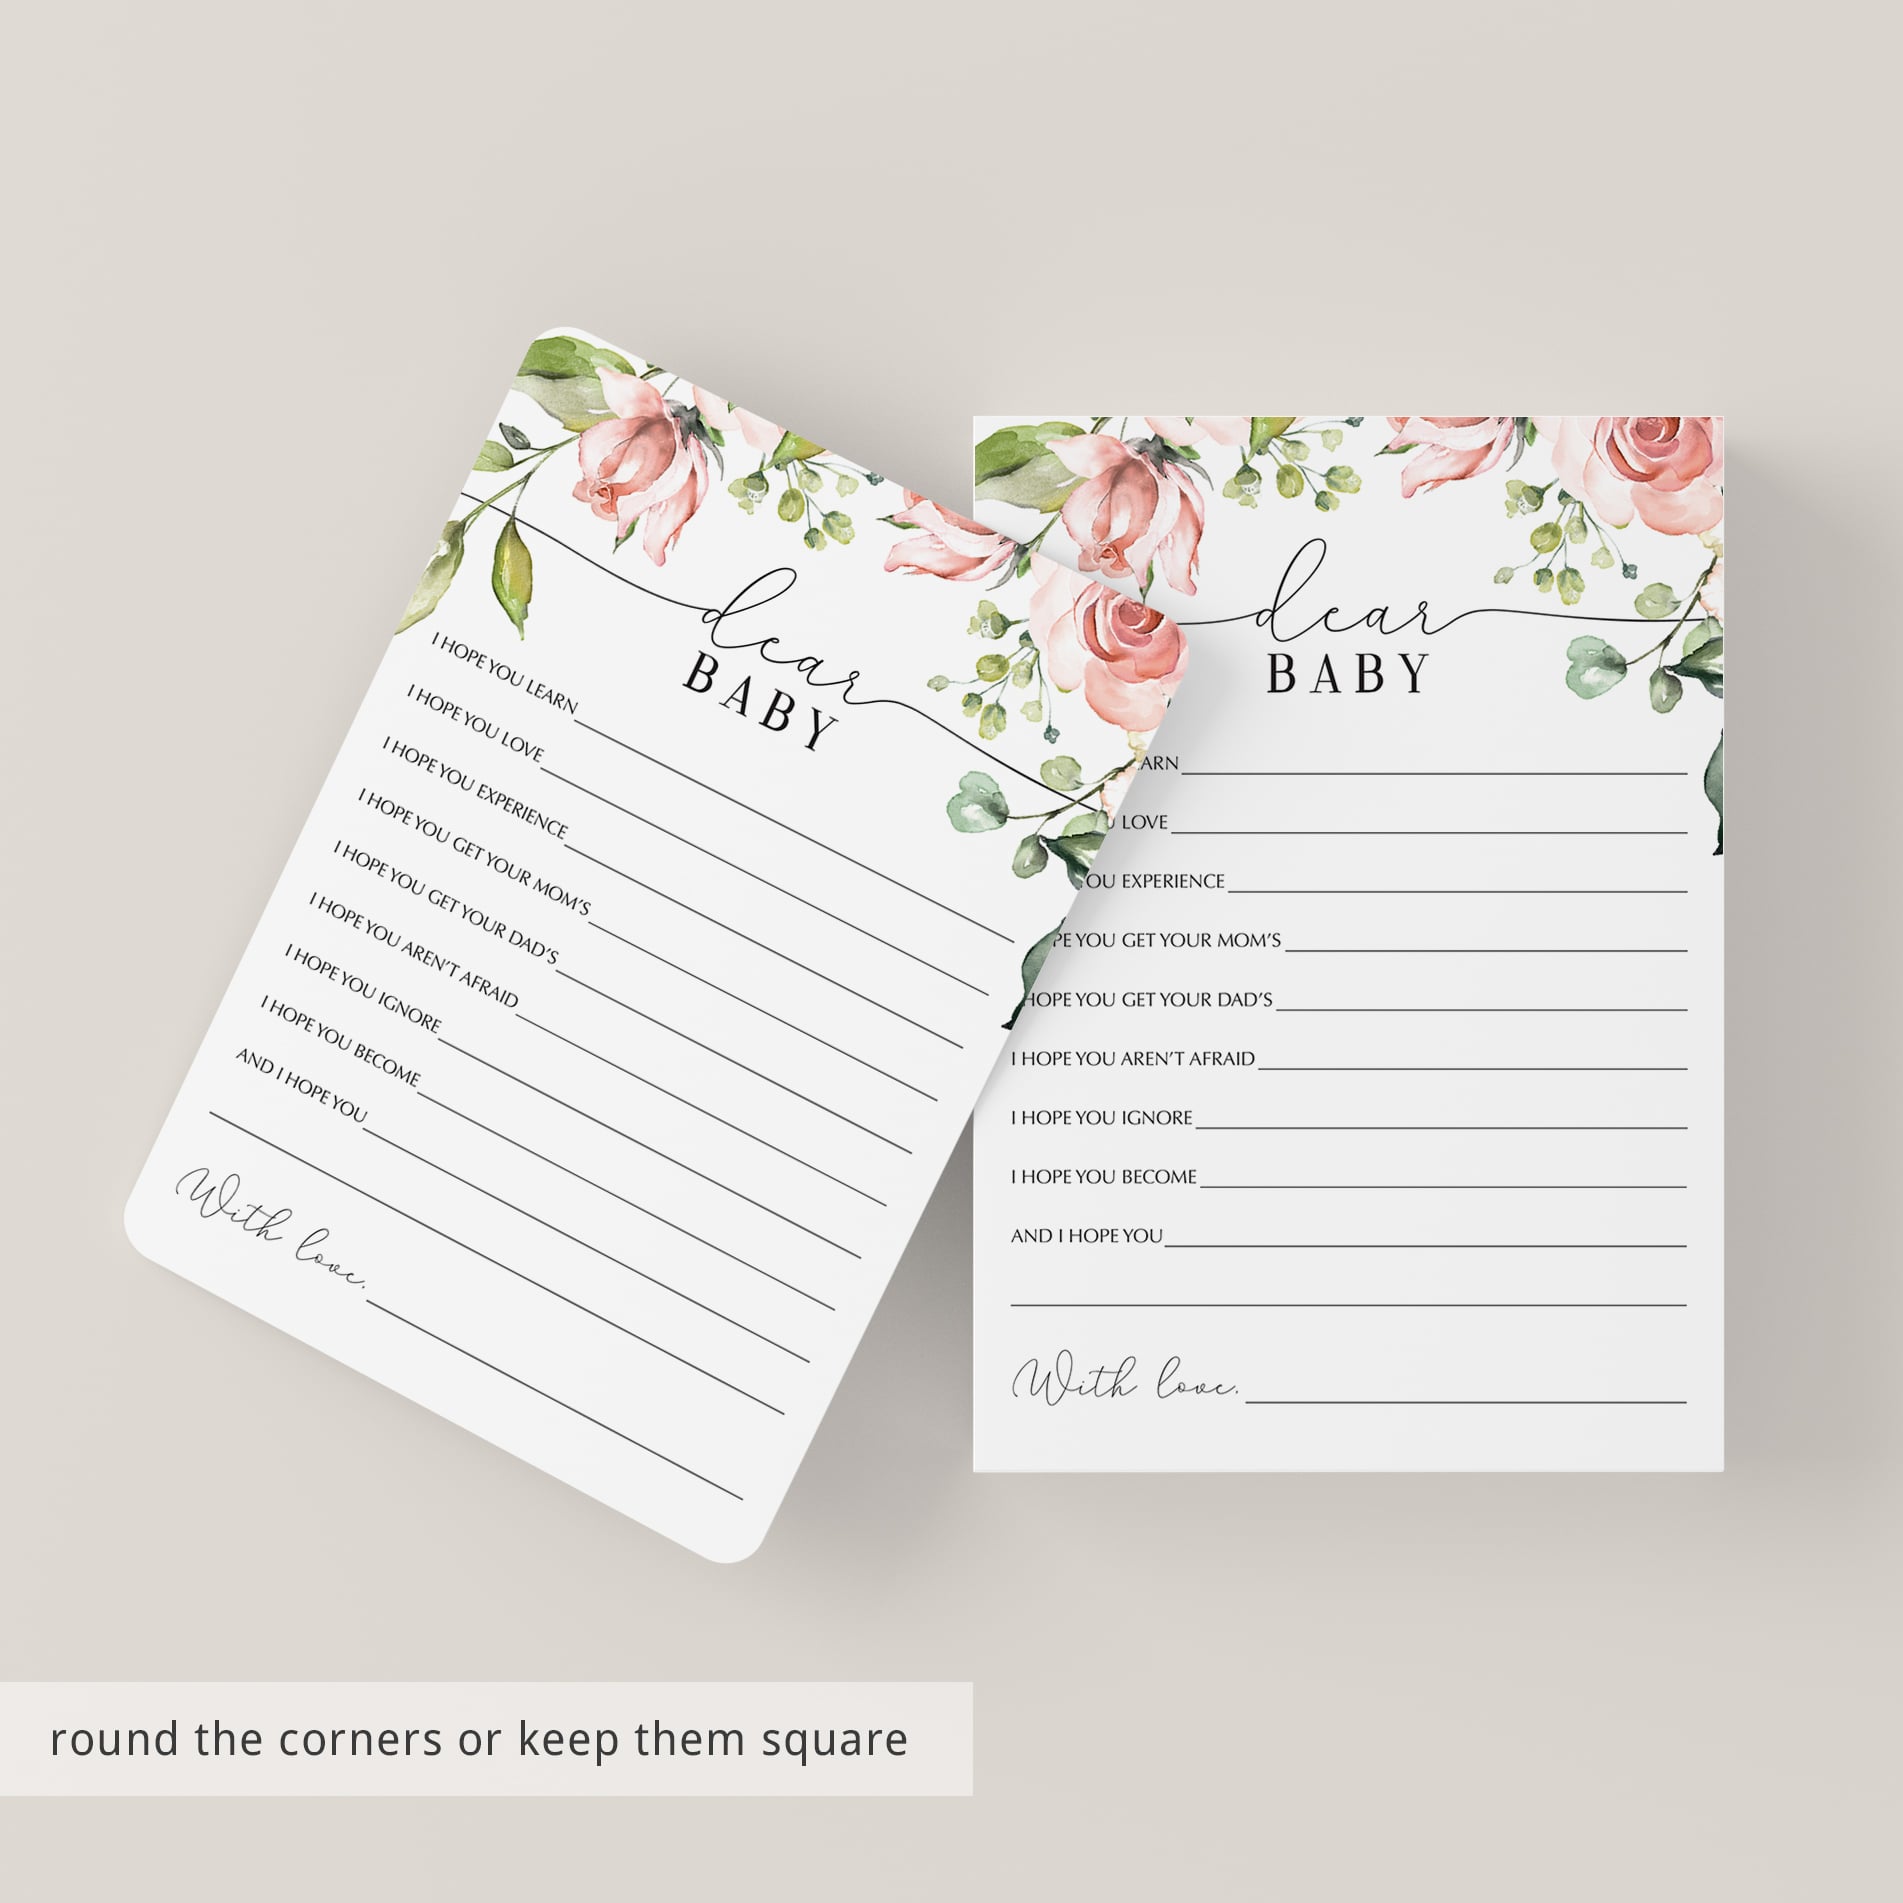 Printable wishes for the new baby party game flower theme by LittleSizzle